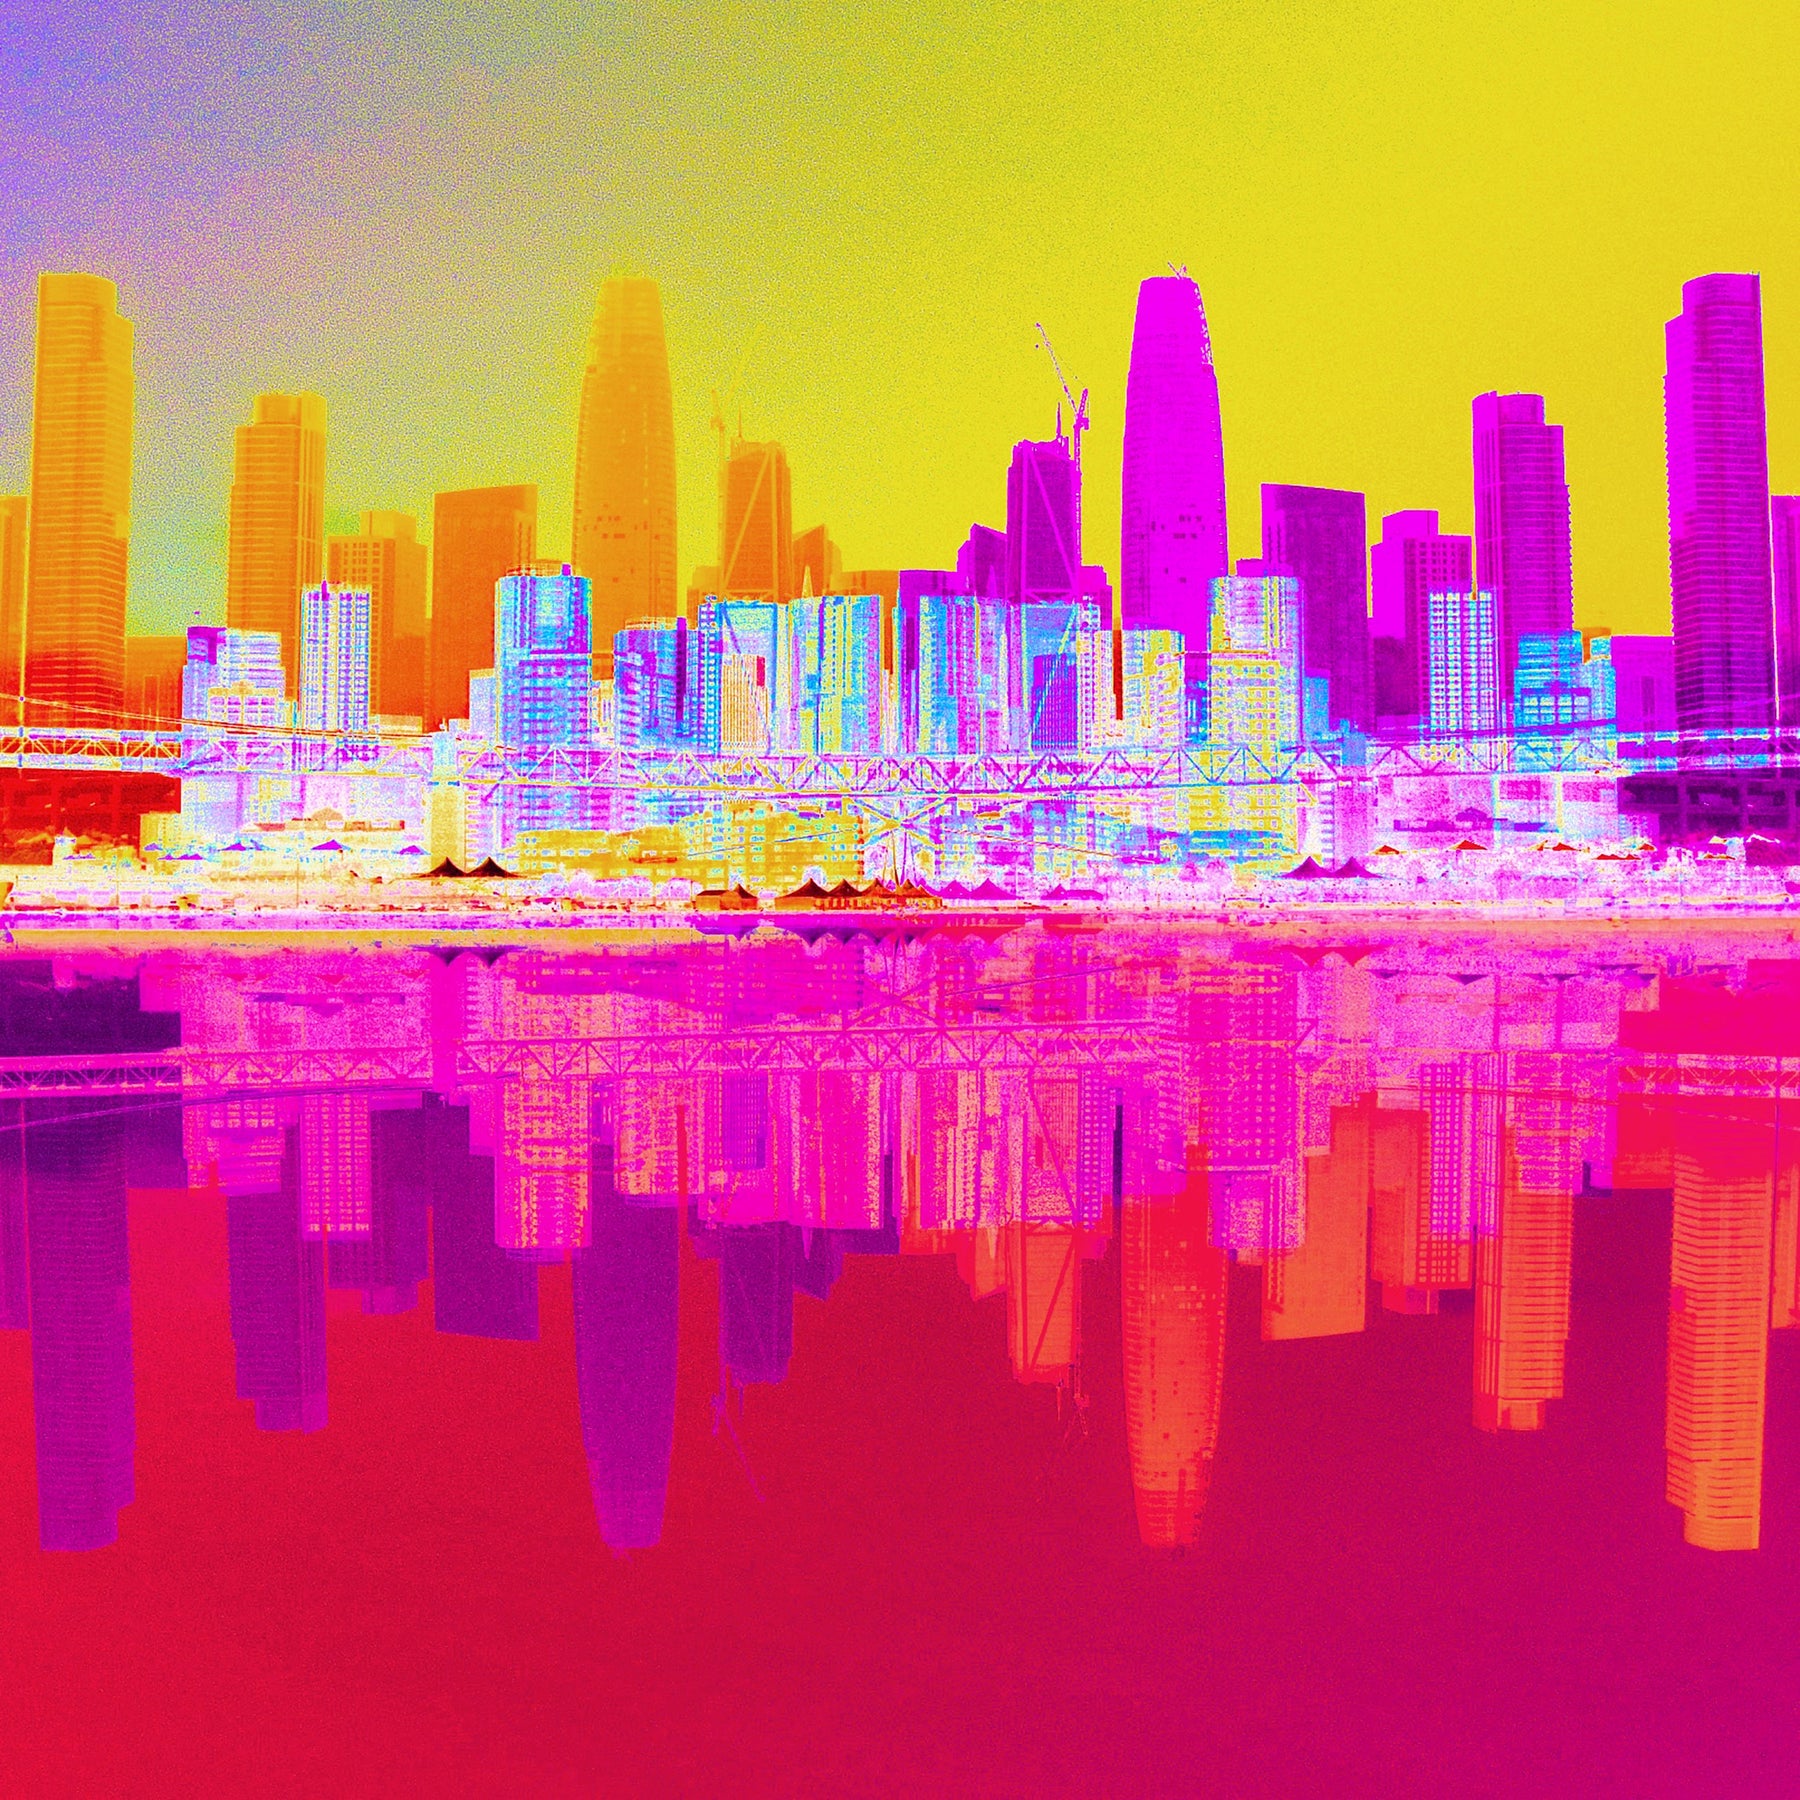 Image of a colorful city digital collage by photographer Deena Smith.